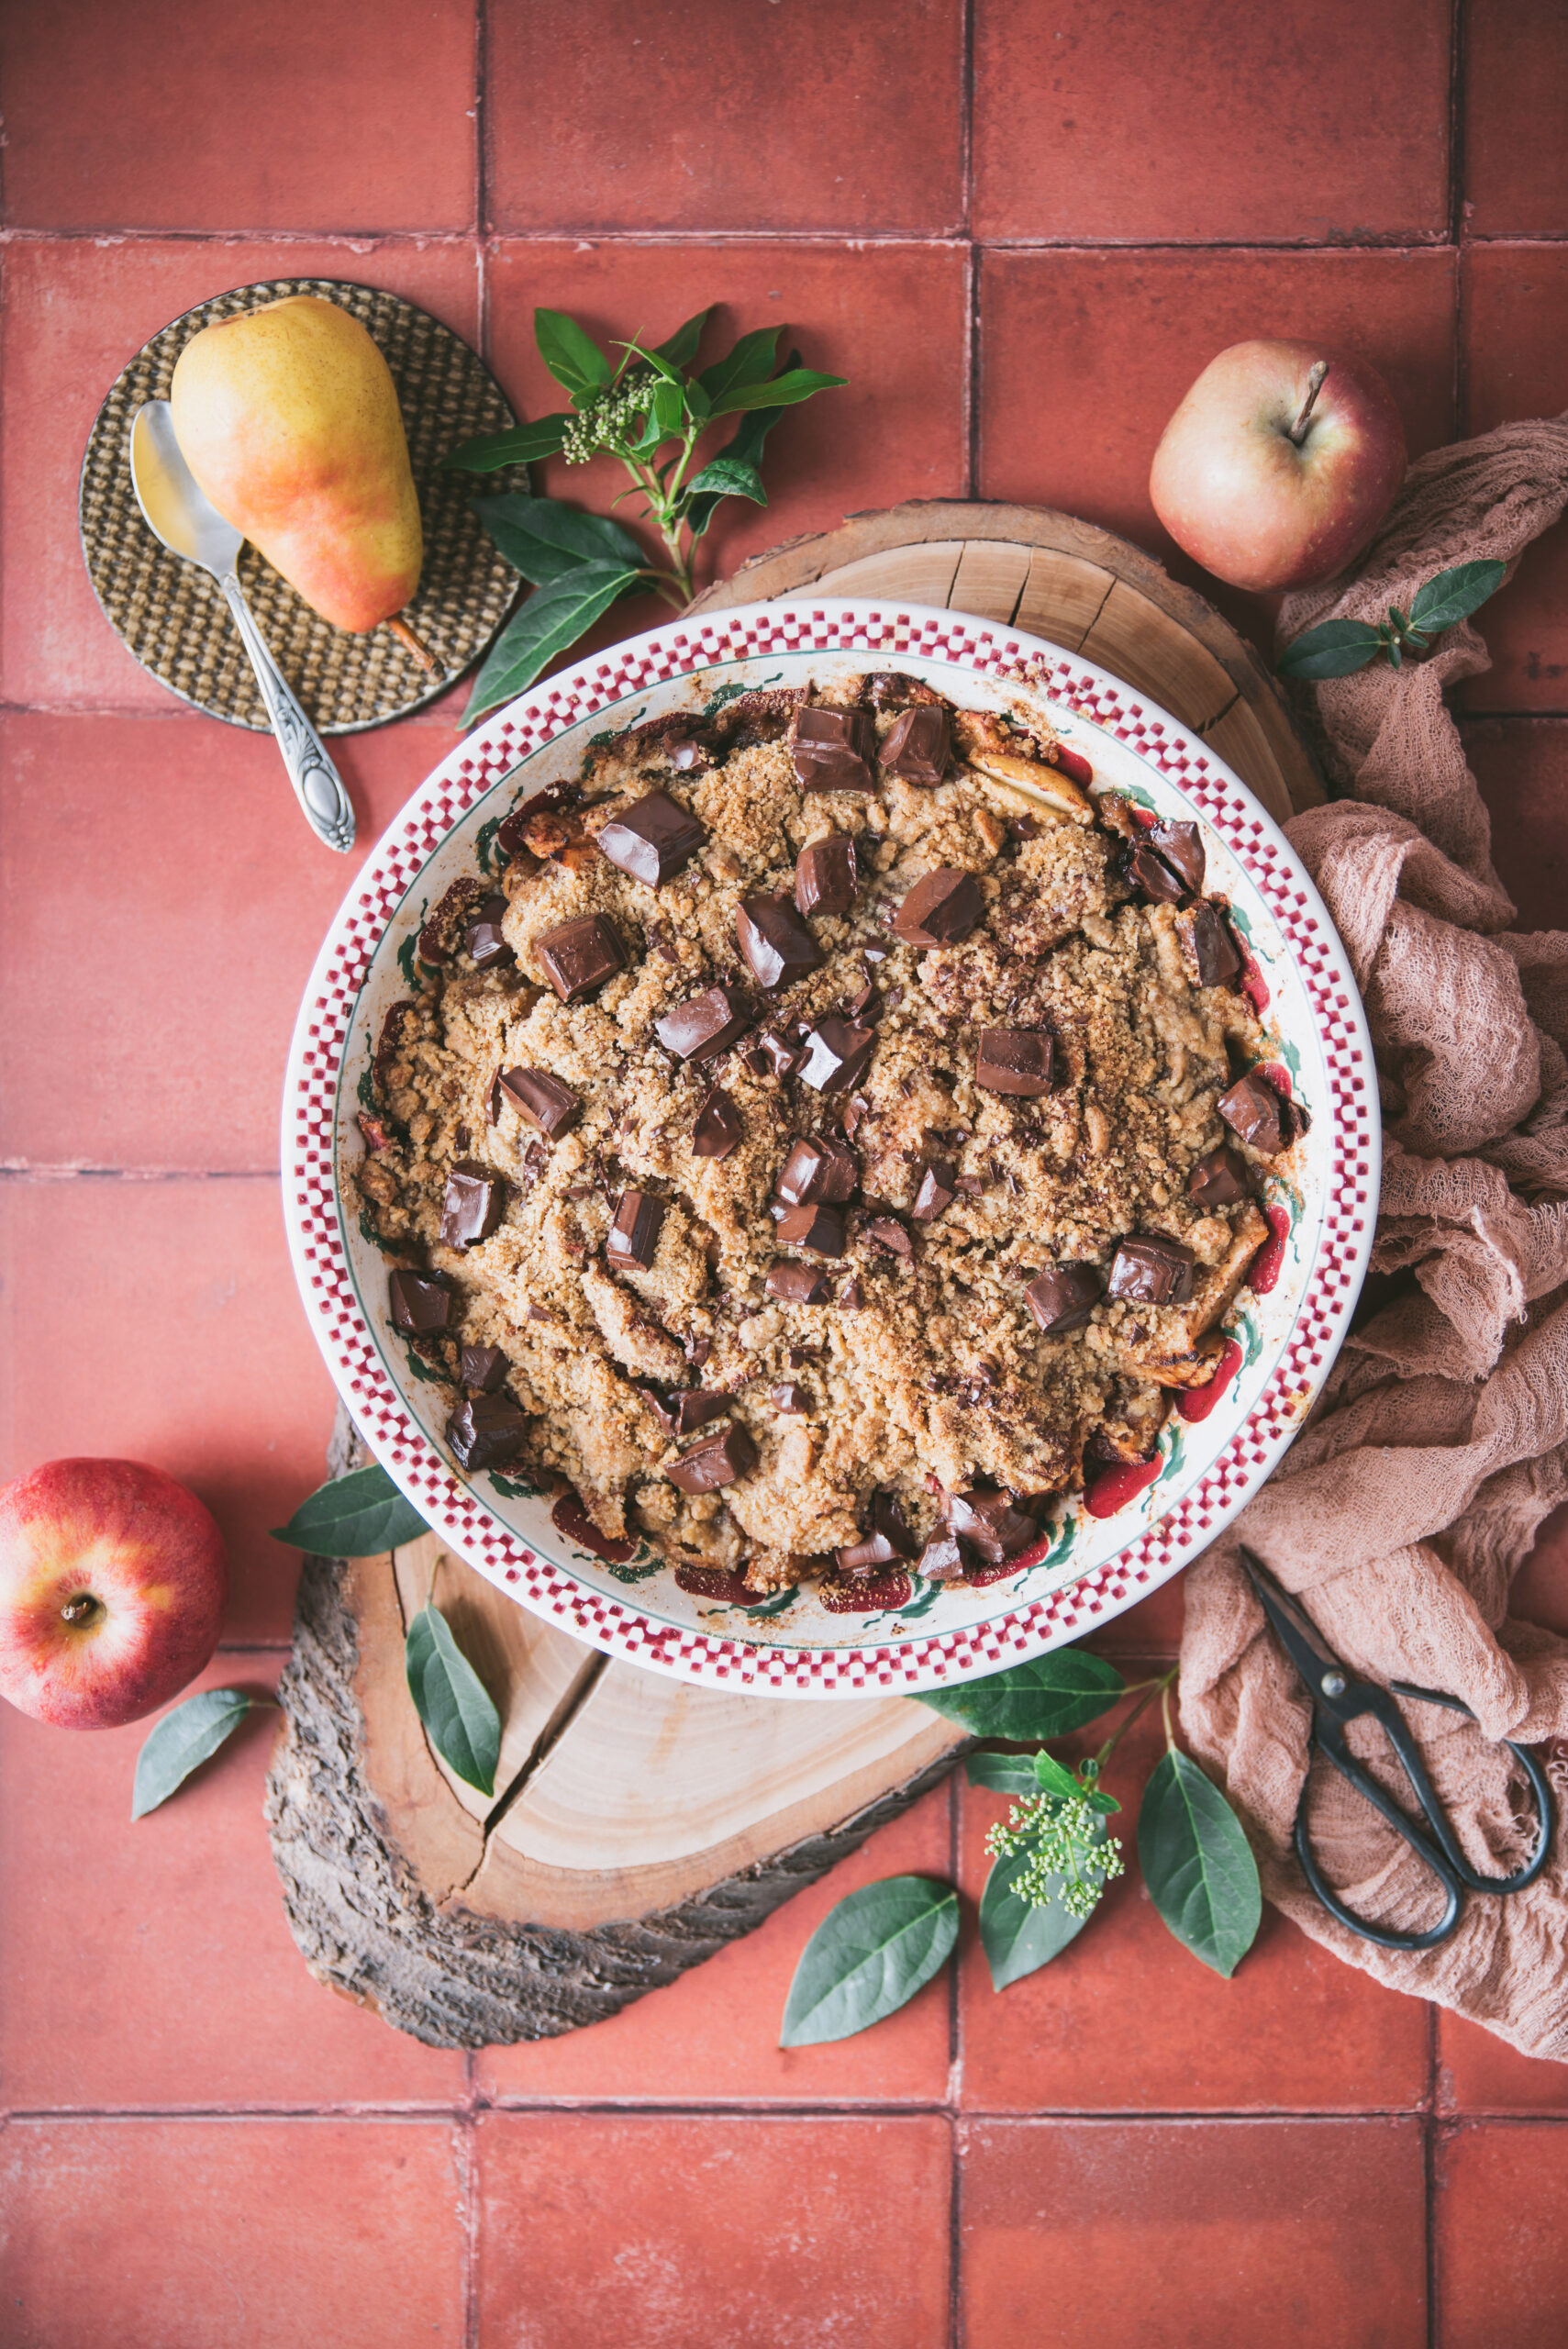 Apple and pear crumble recipe